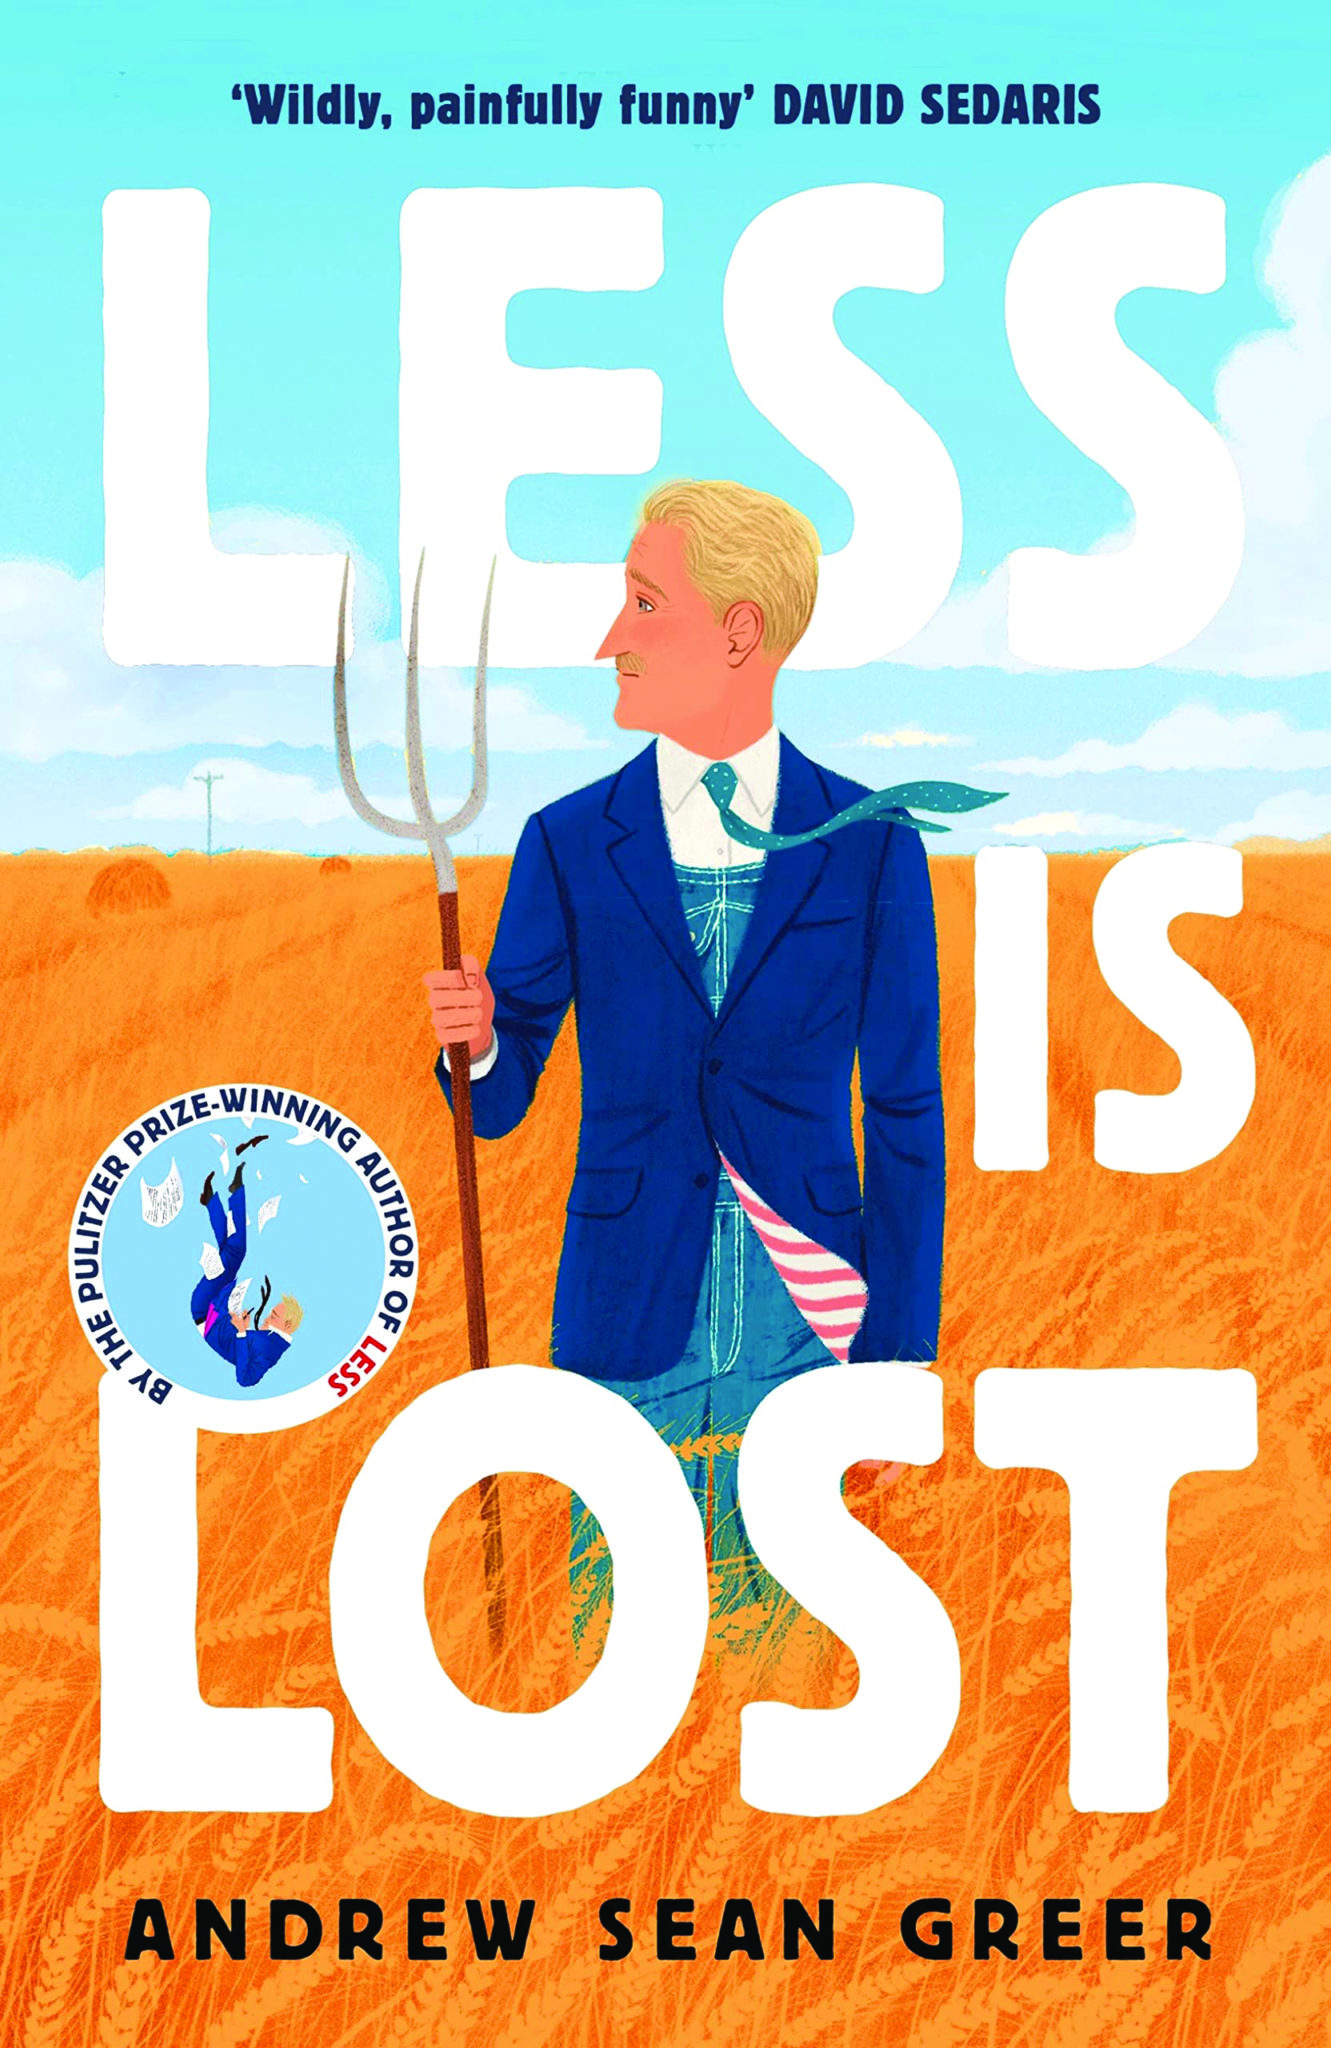 andrew greer less is lost